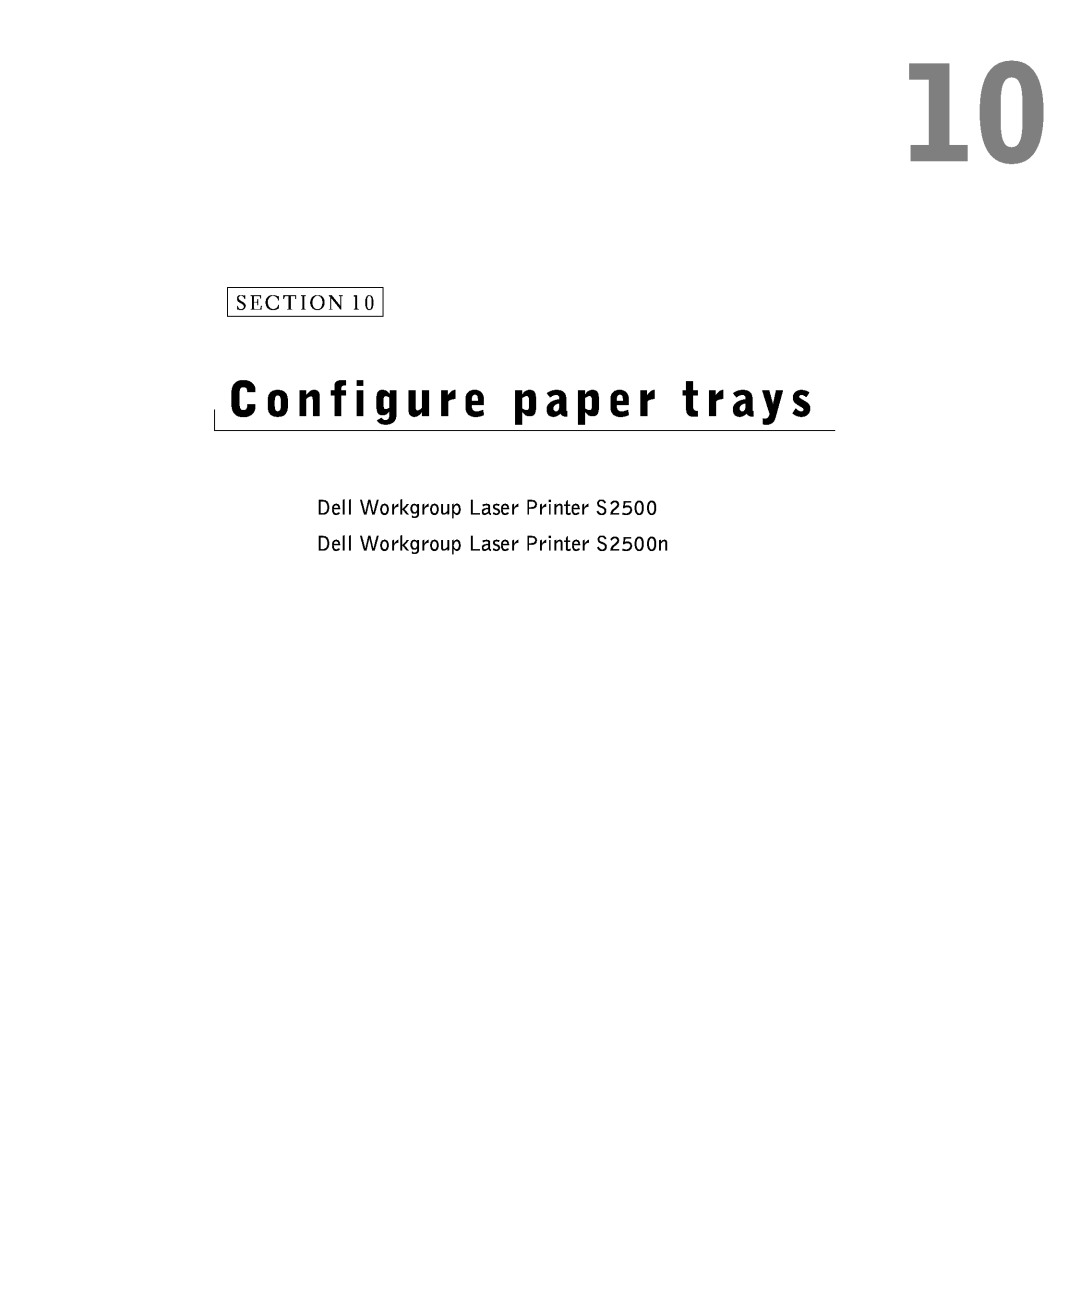 Dell owner manual Configure paper trays, Dell Workgroup Laser Printer S2500n 